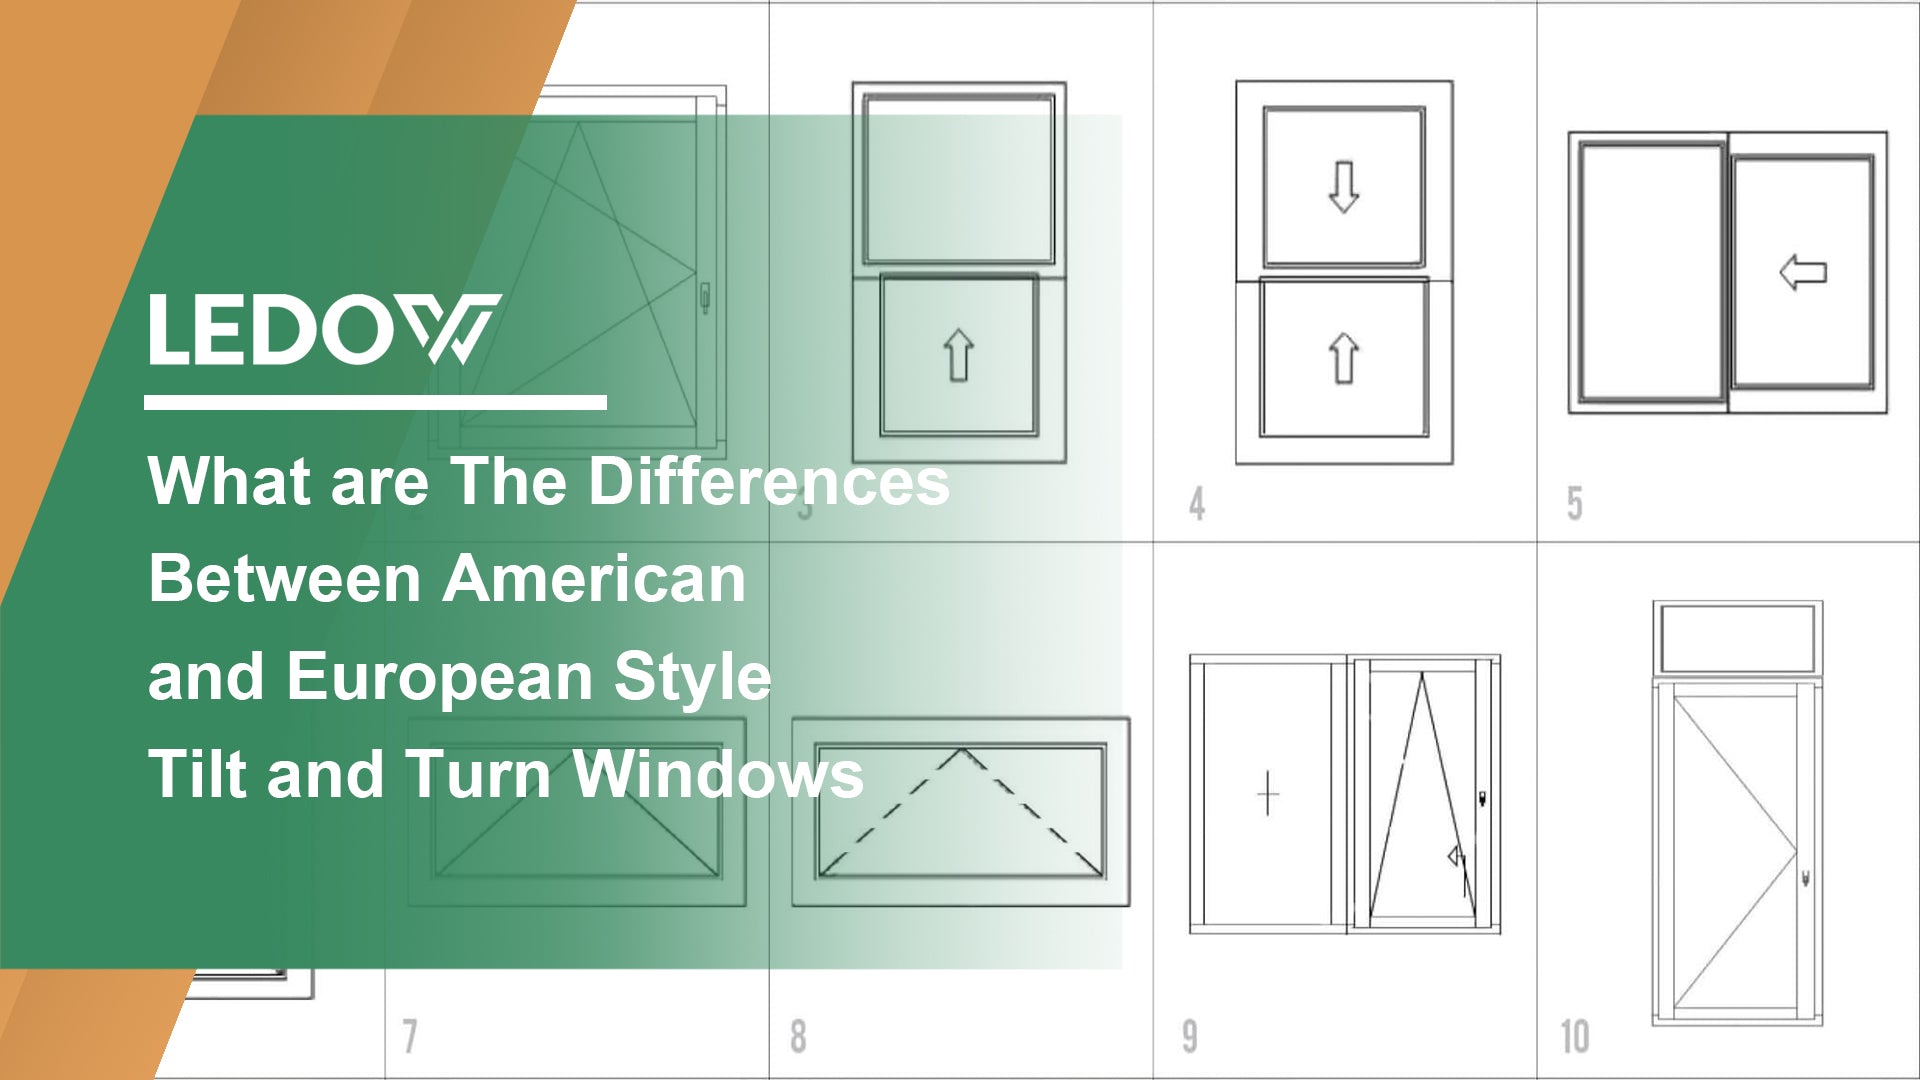 What are The Differences Between American and European Style Tilt and Turn Windows?